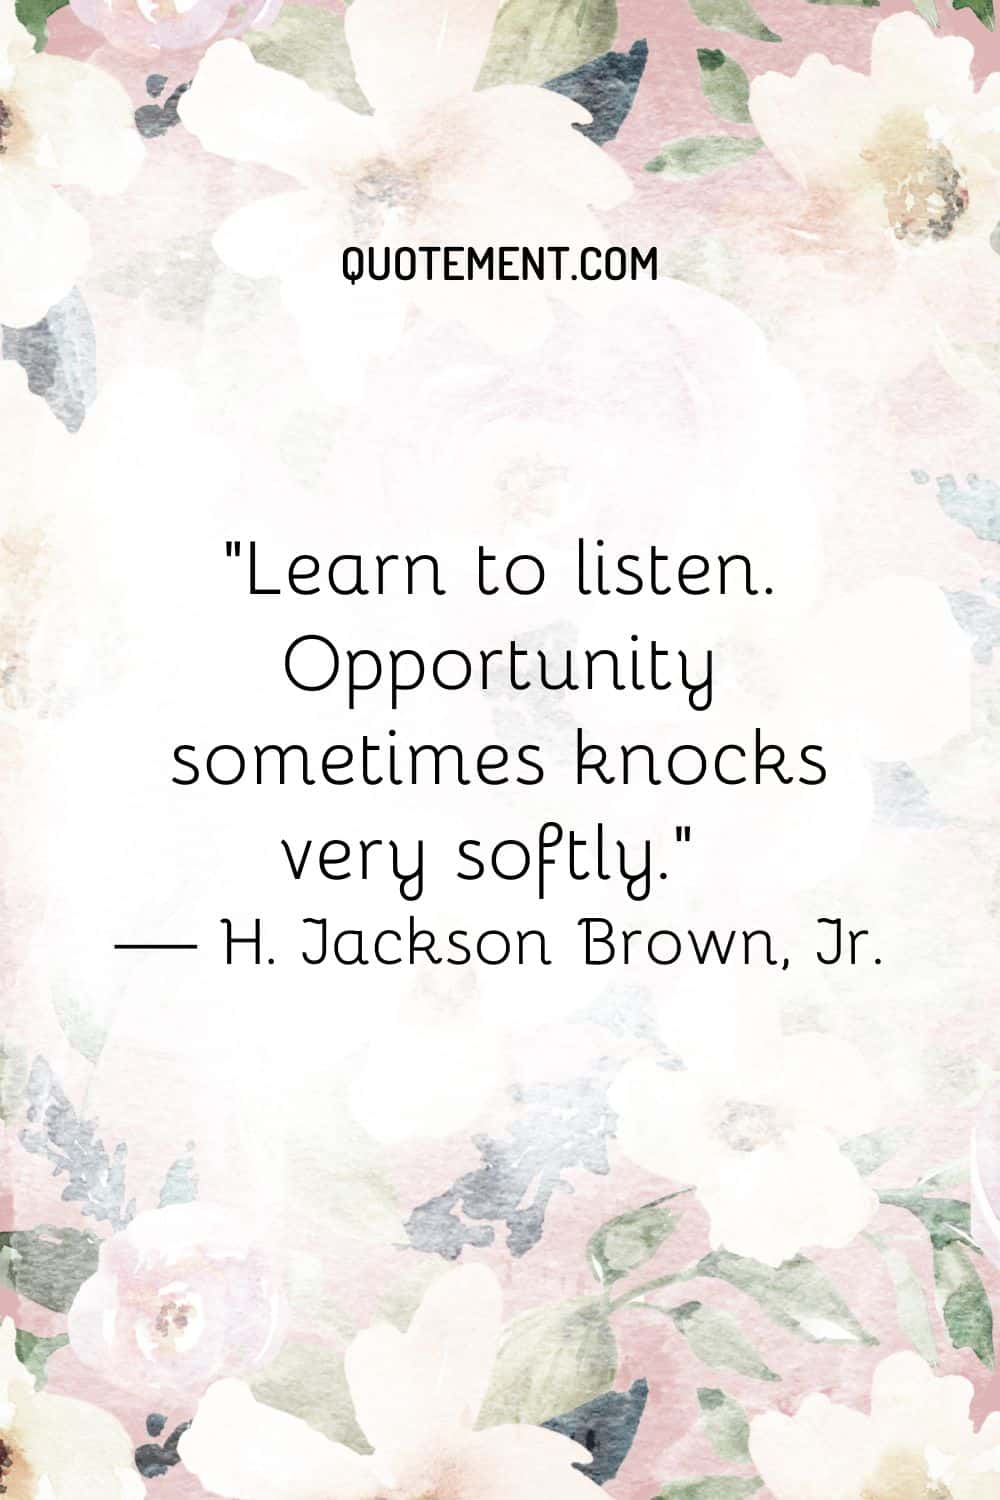 Learn to listen. Opportunity sometimes knocks very softly